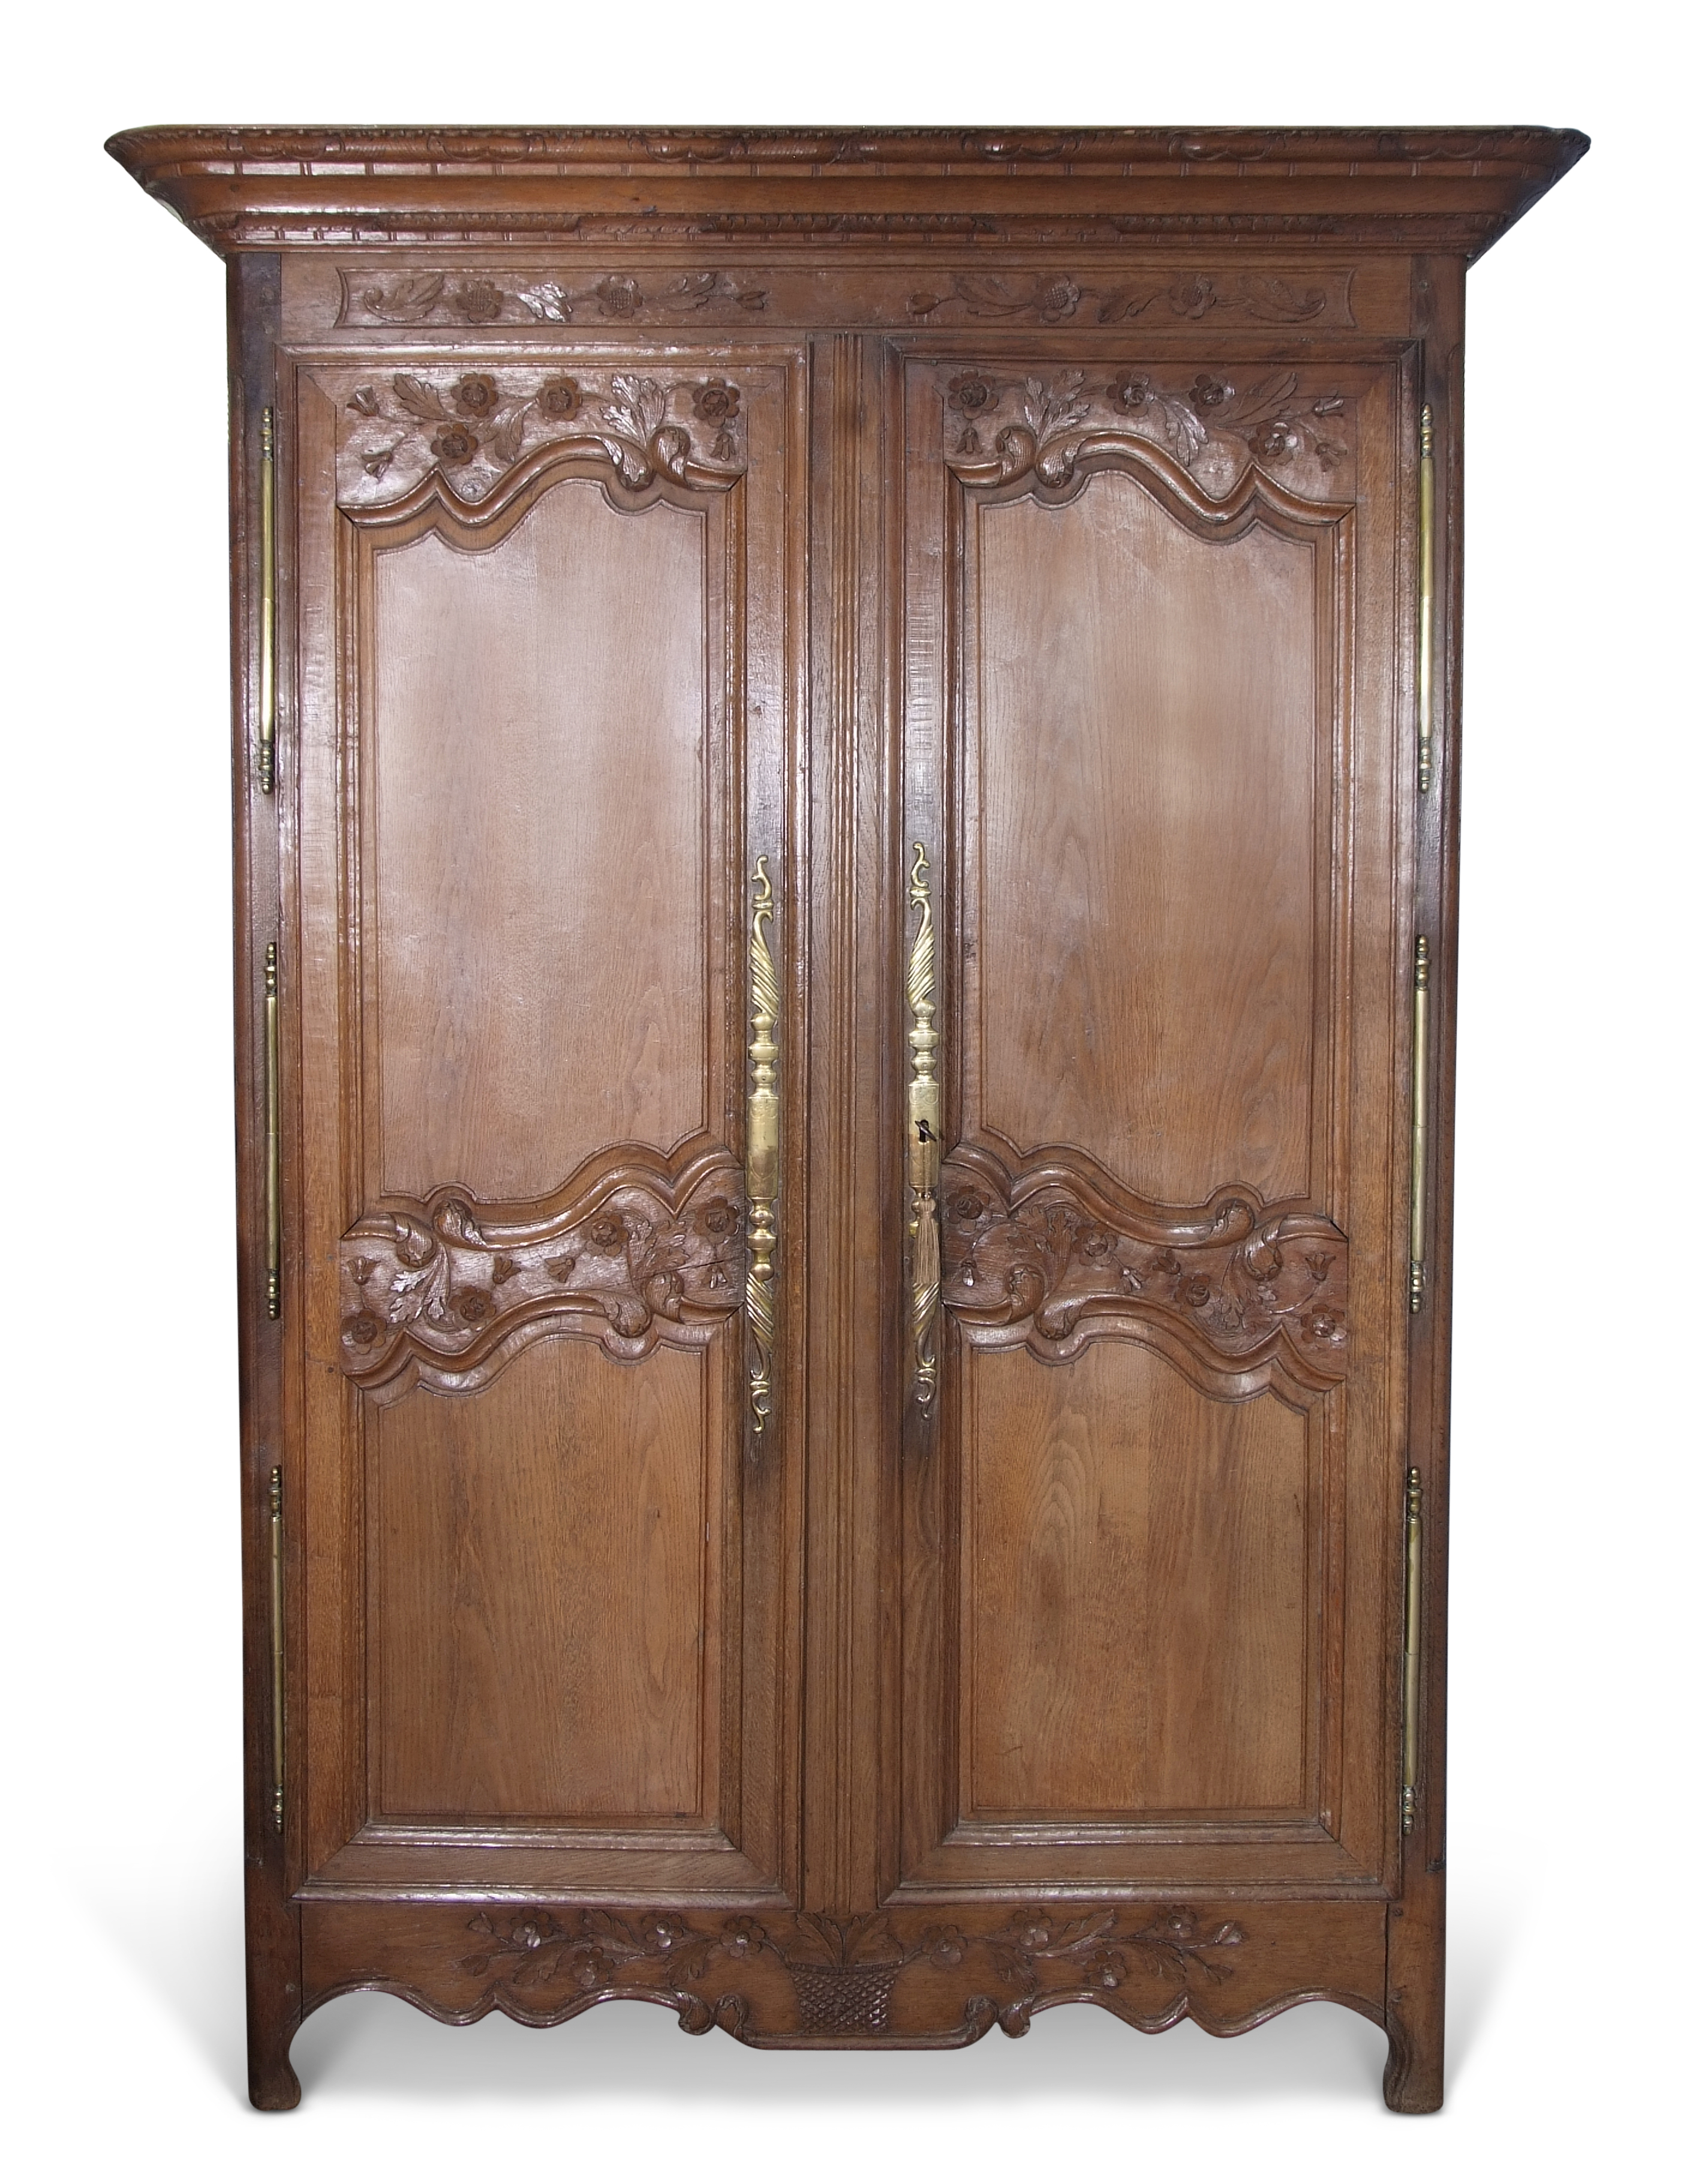 Late 18th/early 19th century carved walnut French armoire with carved cornice and frieze above two